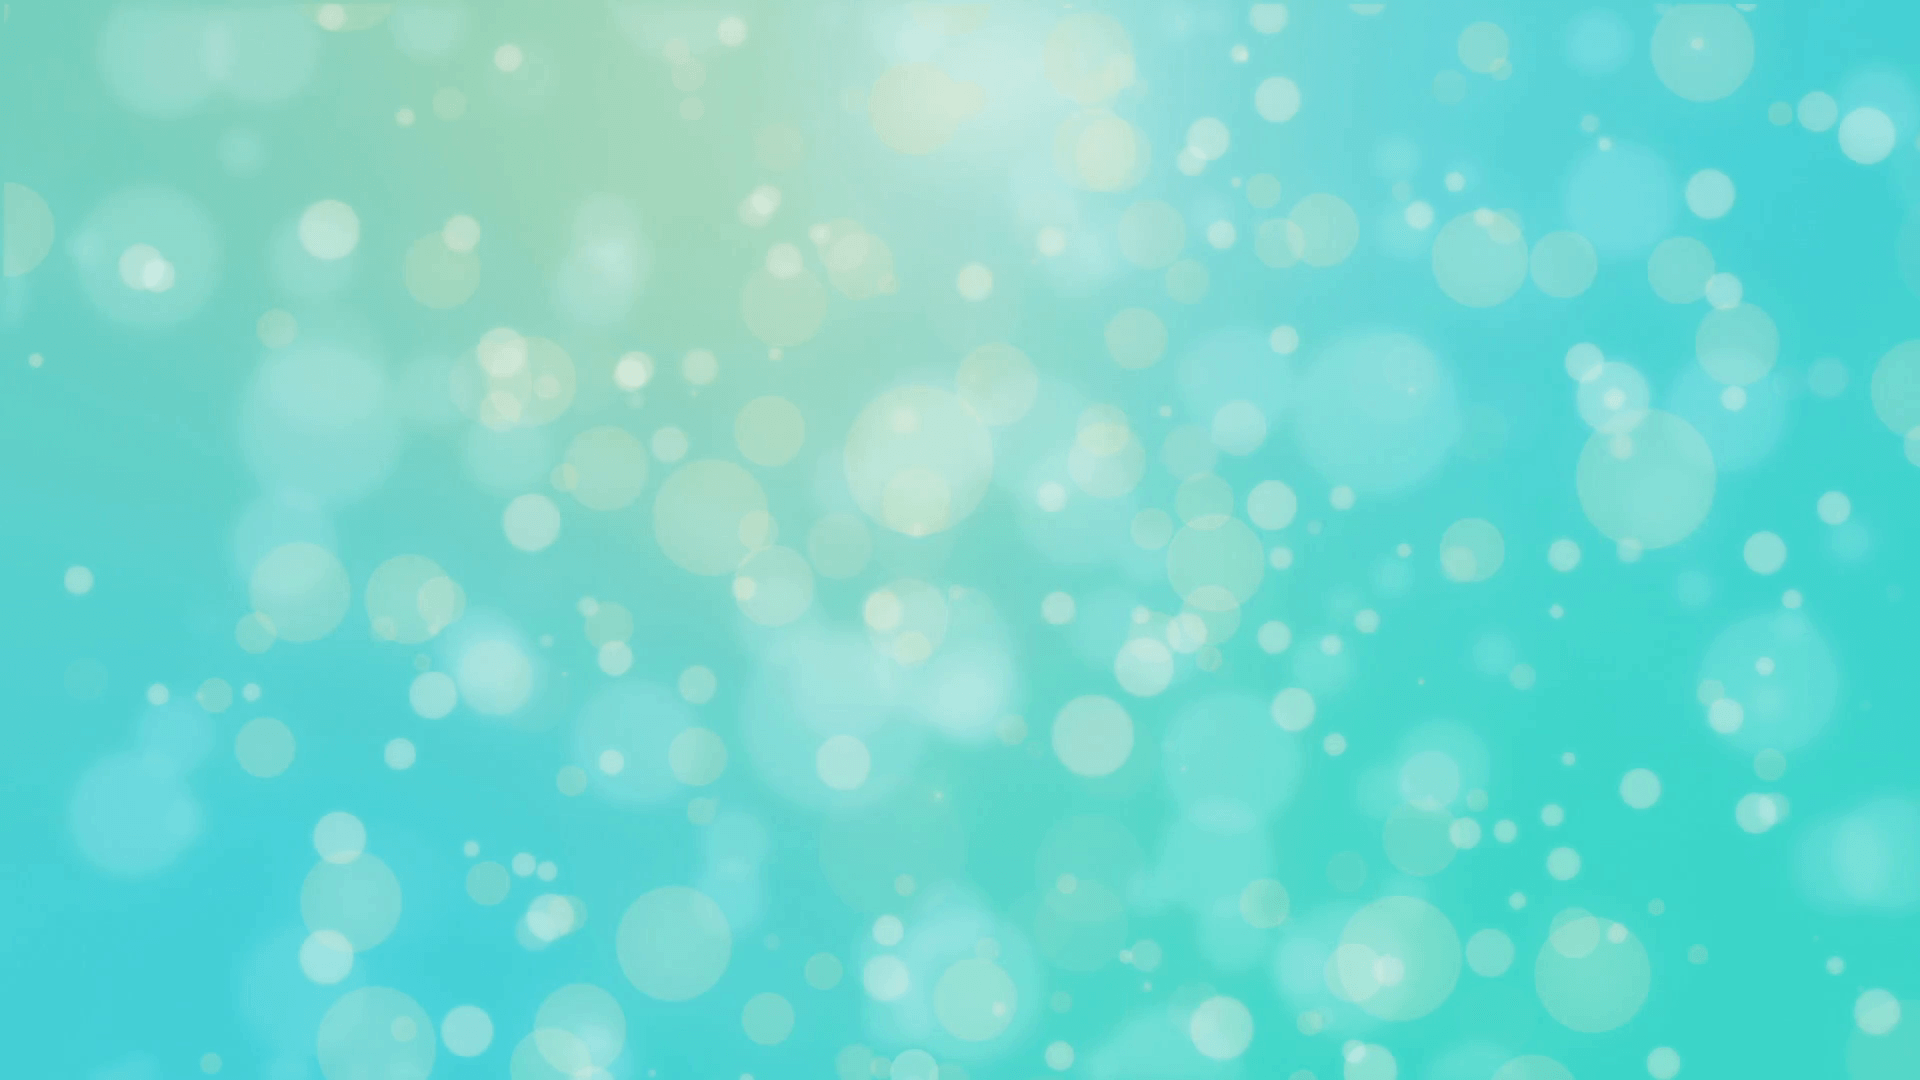 Blue and Teal Wallpaper Free Blue and Teal Background